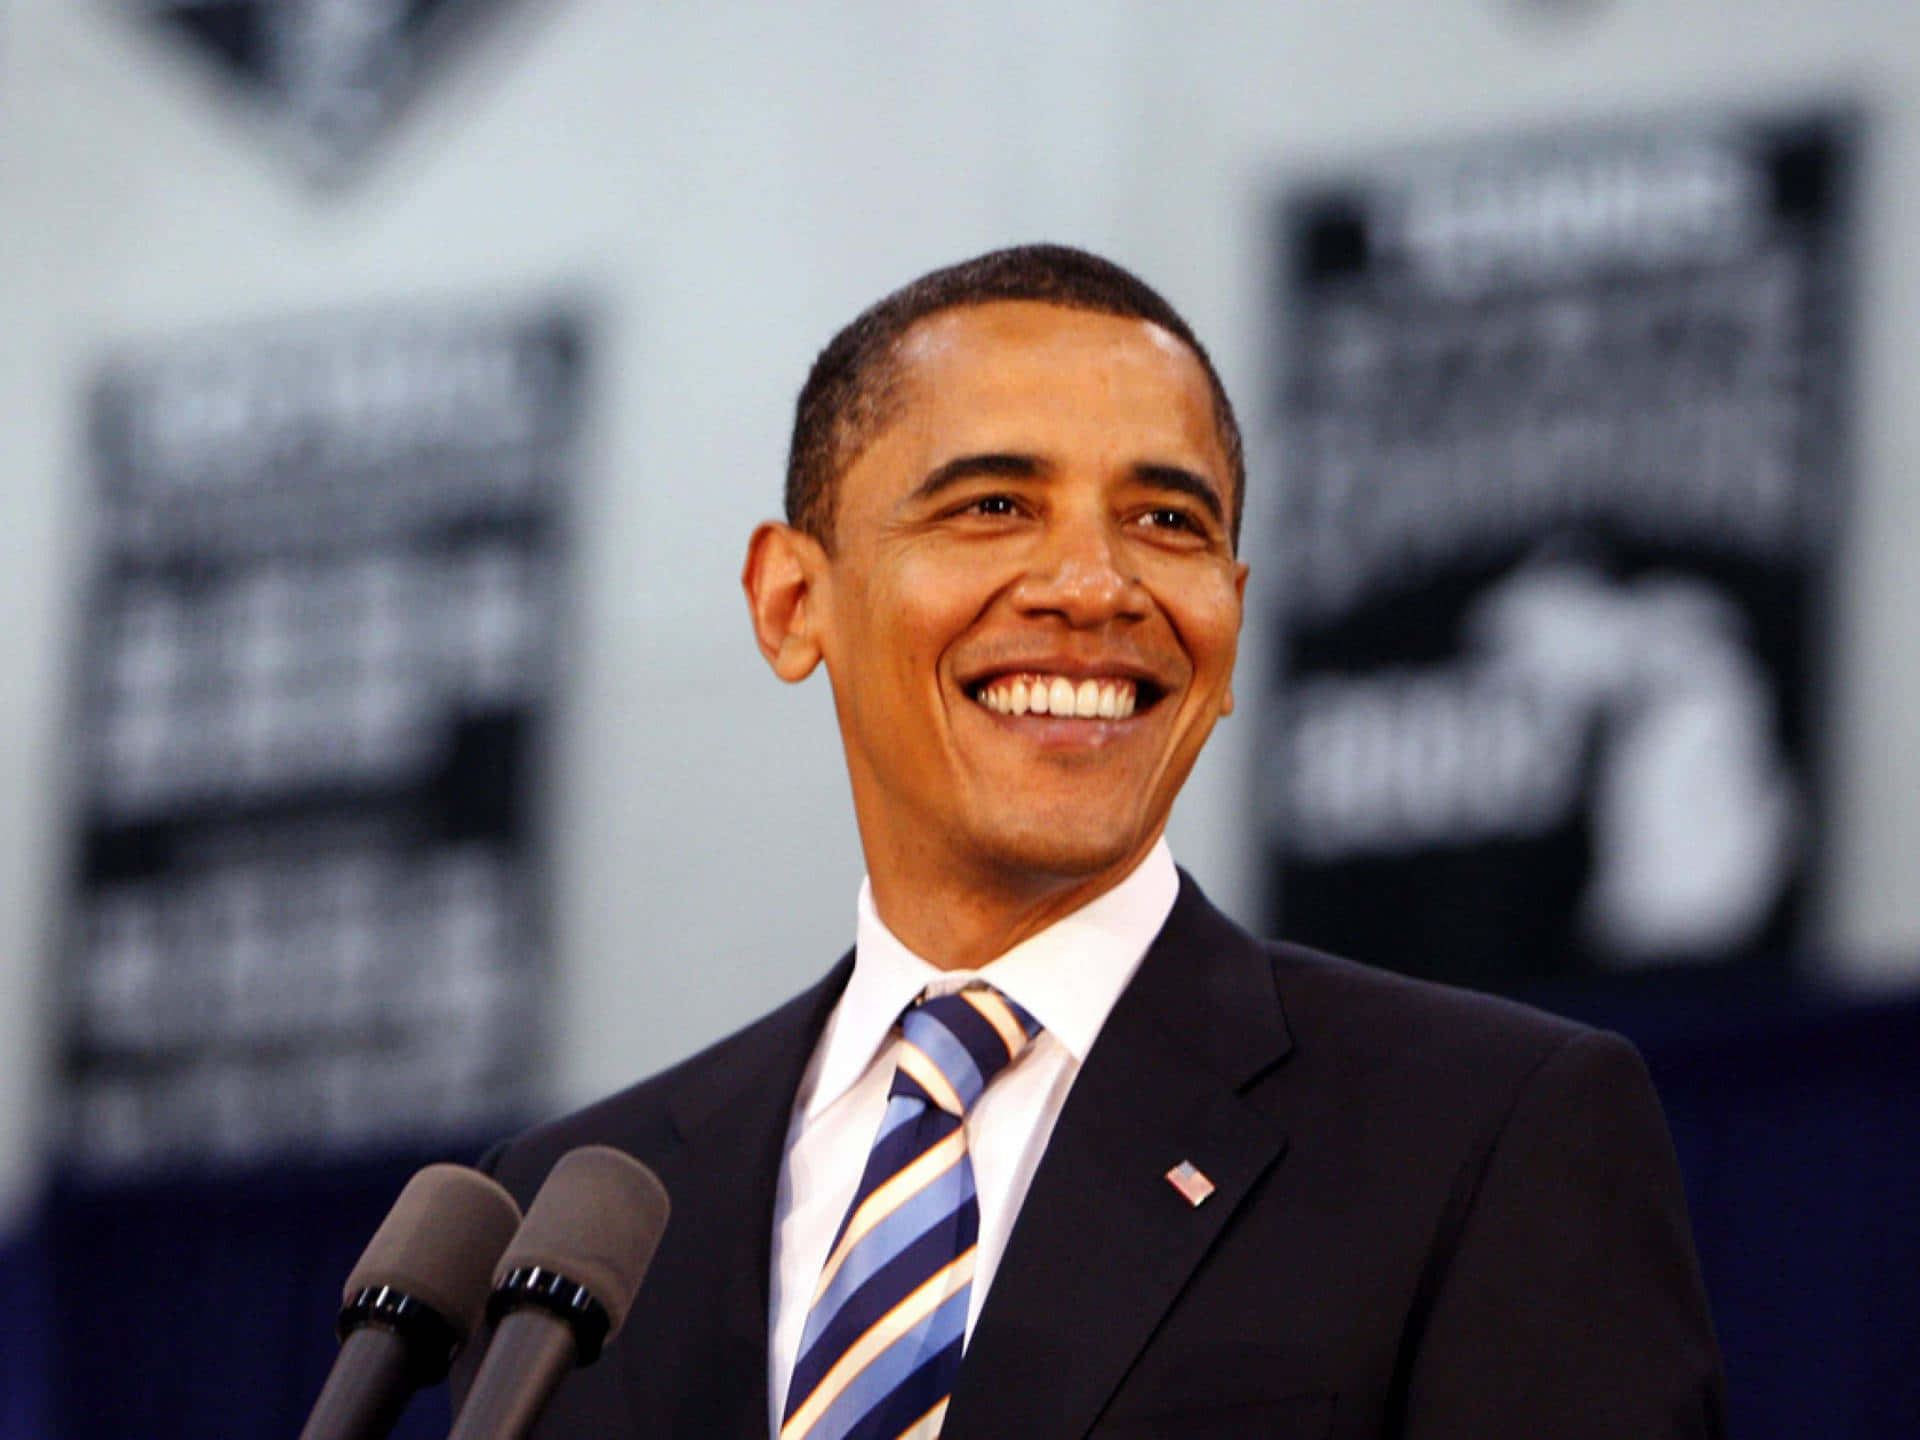 President Barack Obama speaking at a rally in New York